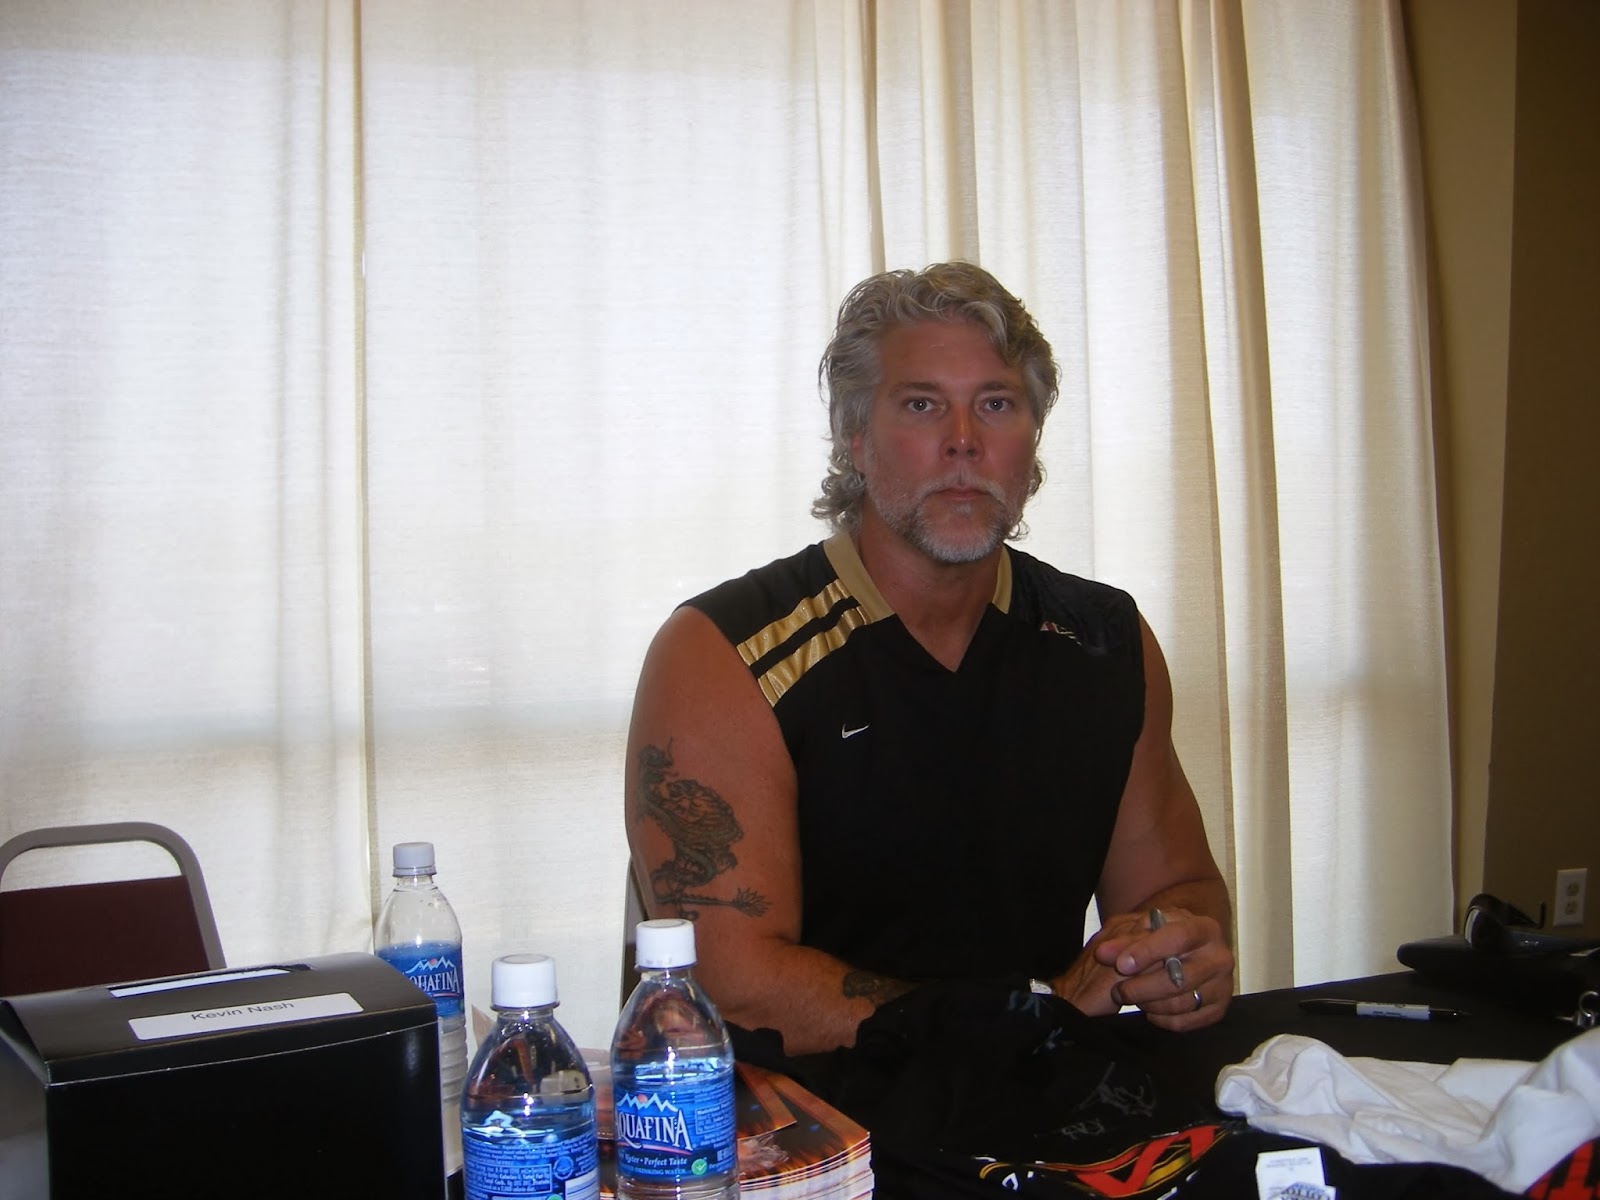 Kevin Nash Hd Wallpapers Free Download